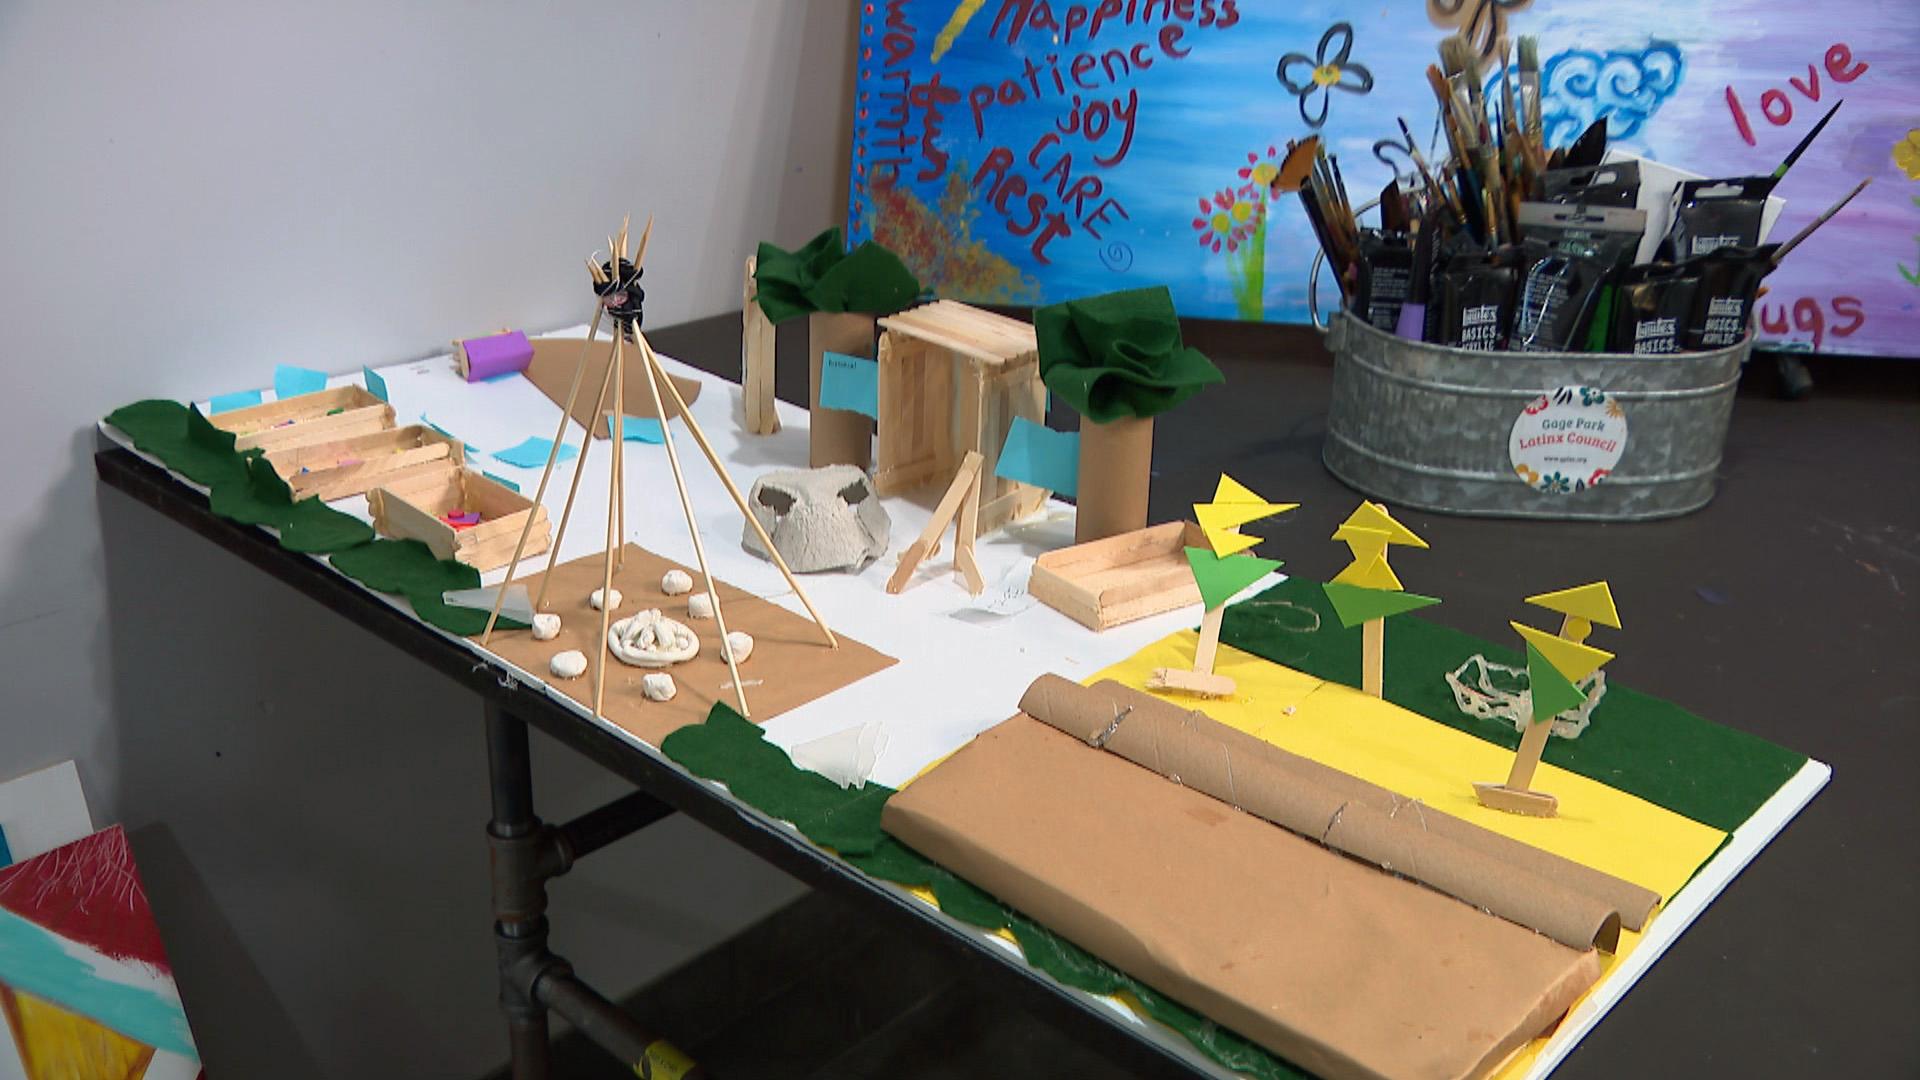 The group made a prototype of the exhibition ahead of its installation. WTTW News)